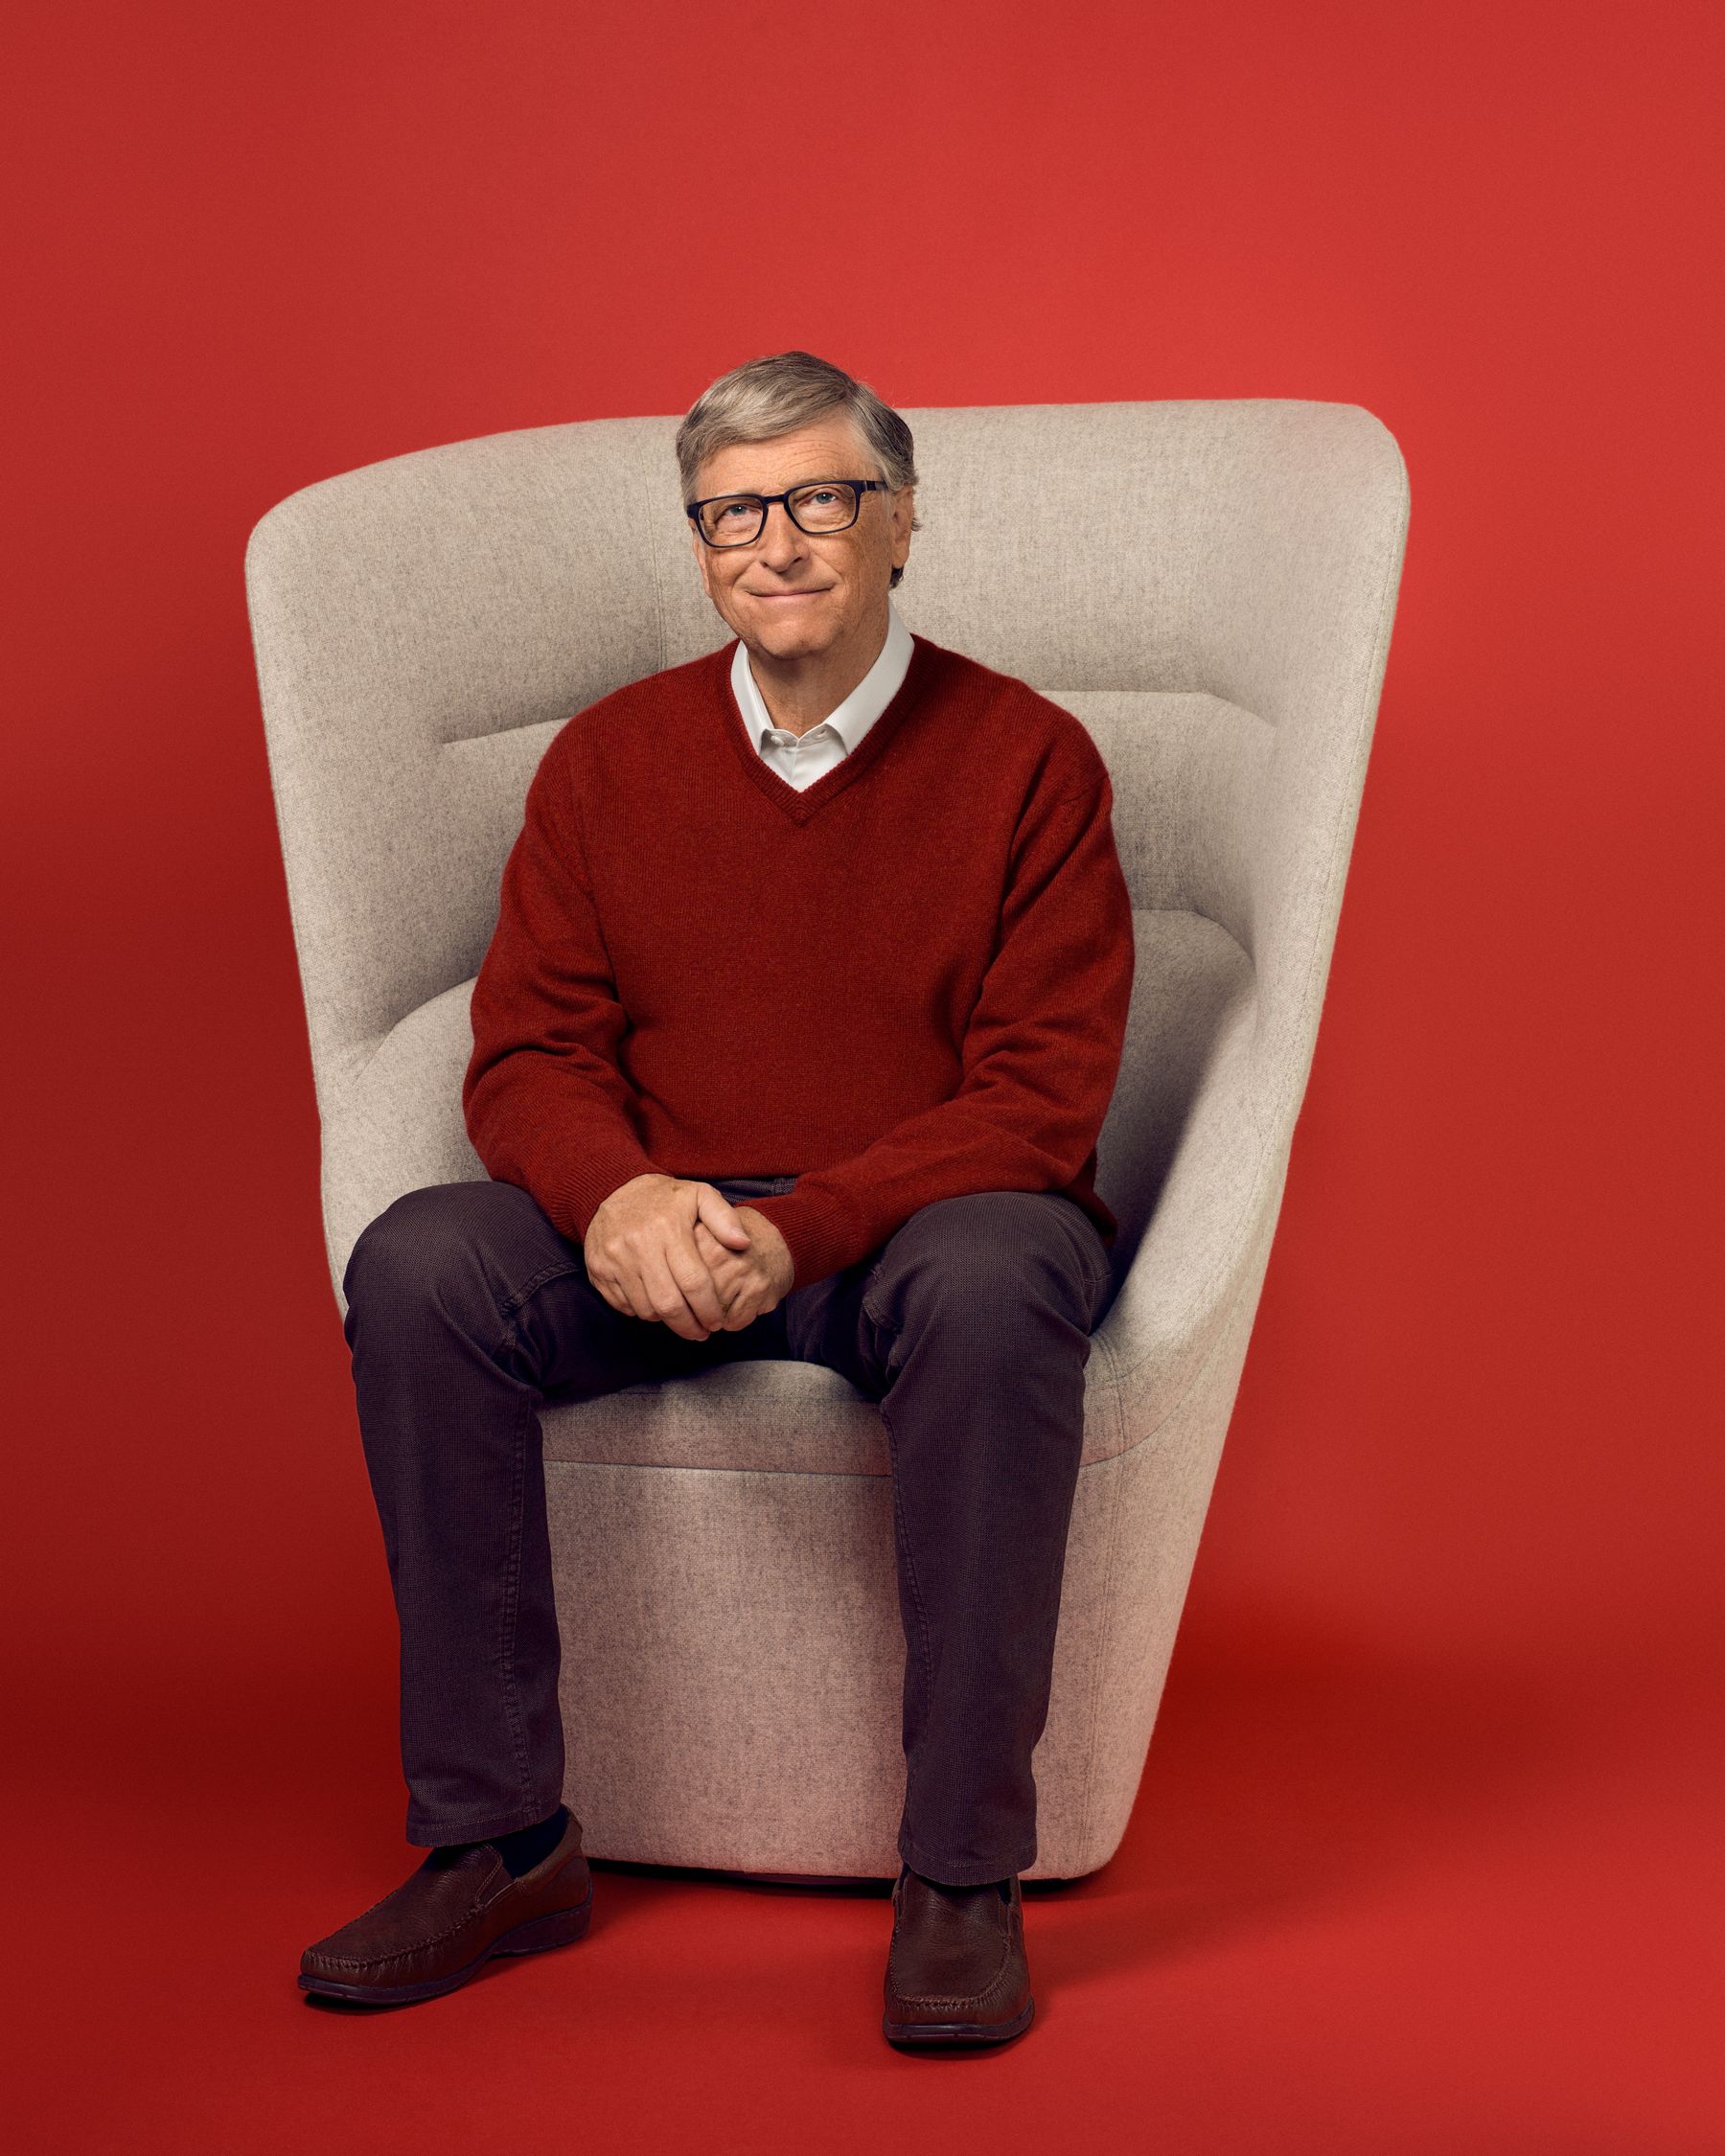 Still image of Bill Gates in front of a red background, sitting